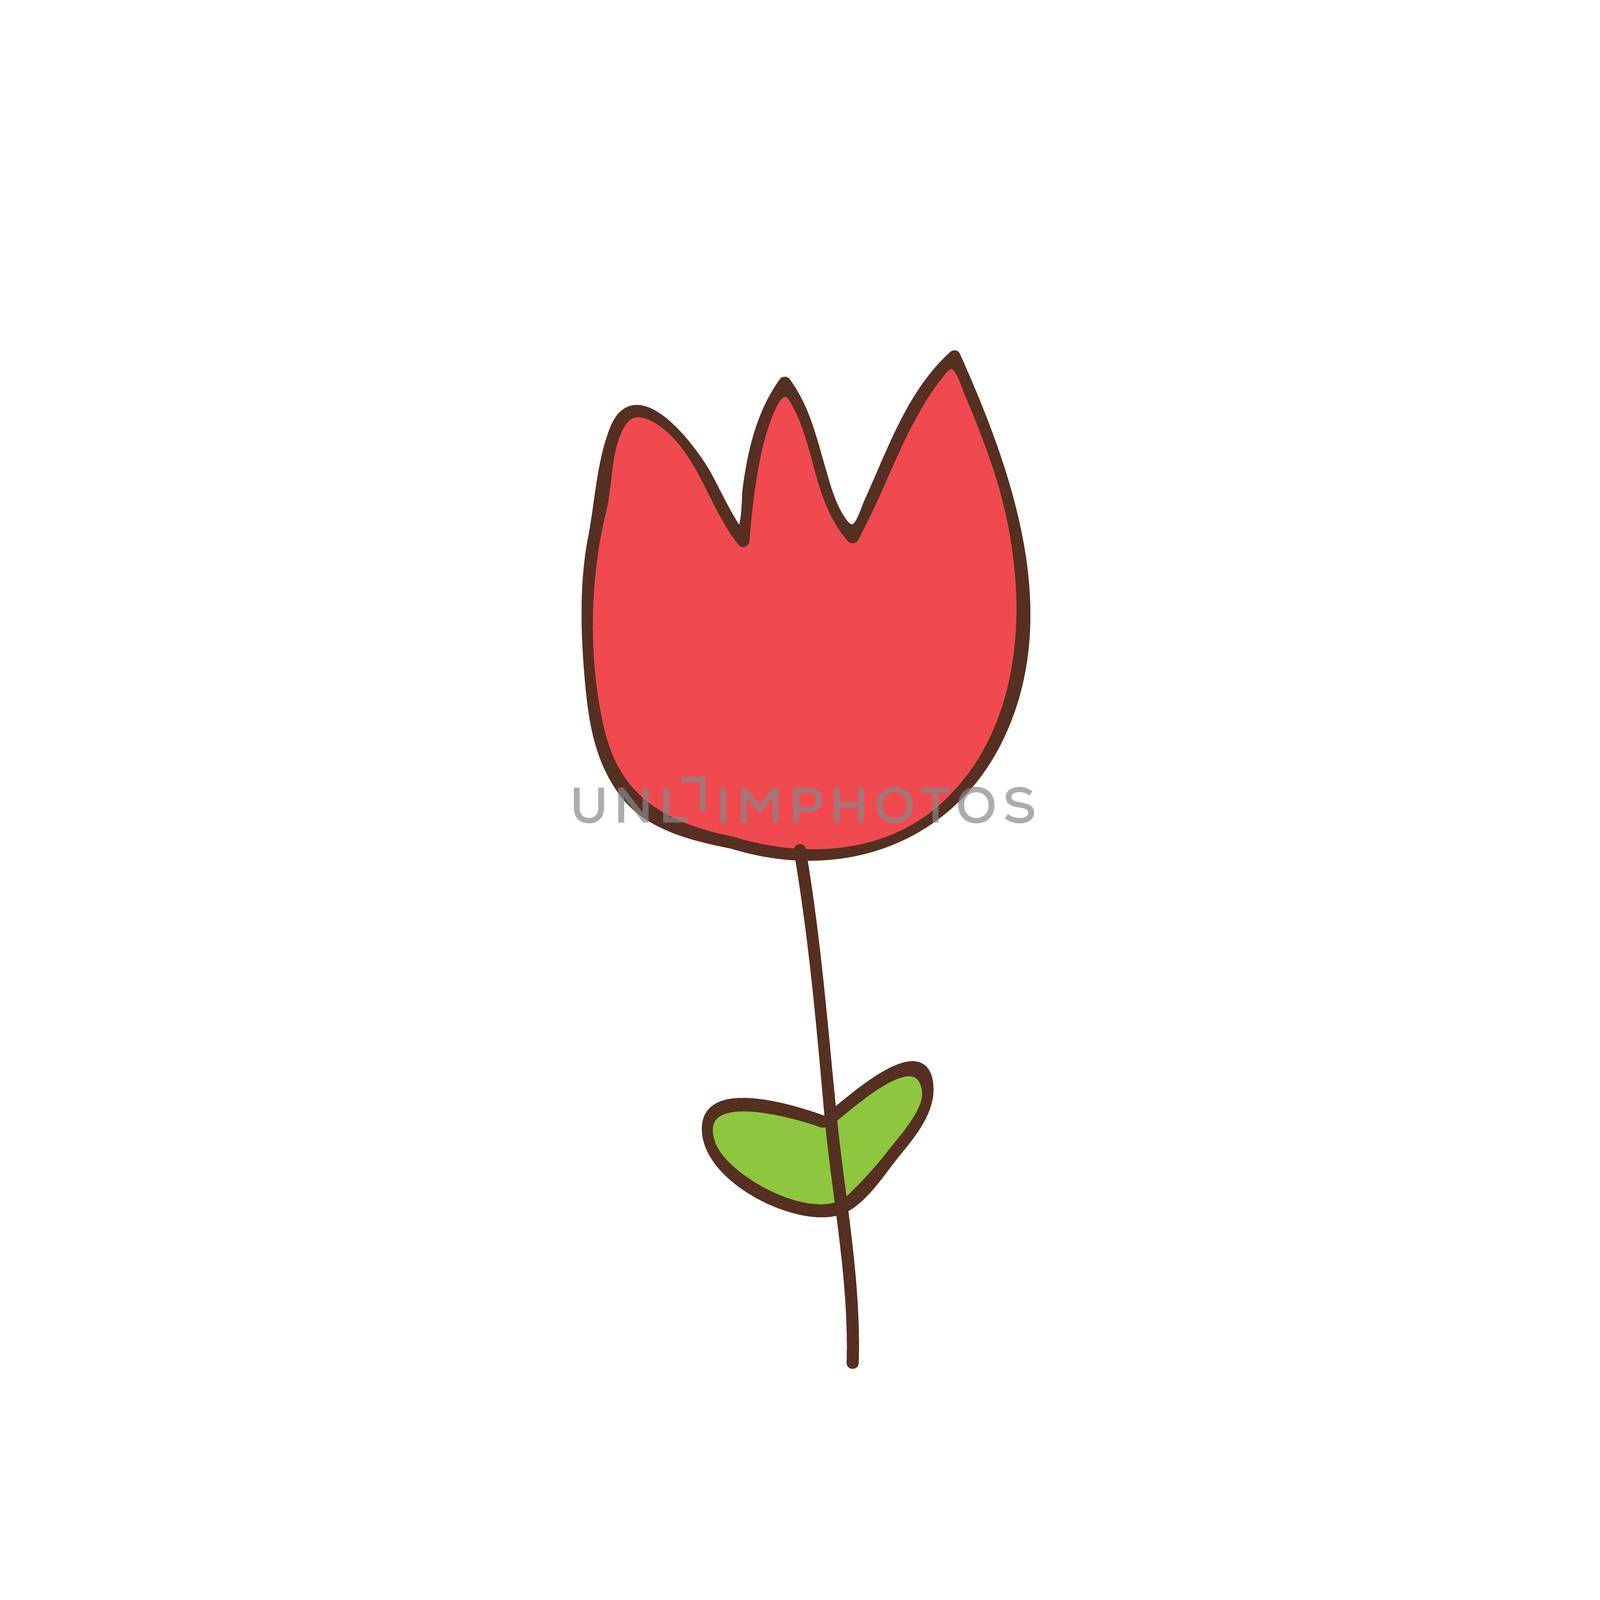 Simple cartoon icon on white background - tulip blooms. 8 March by natali_brill